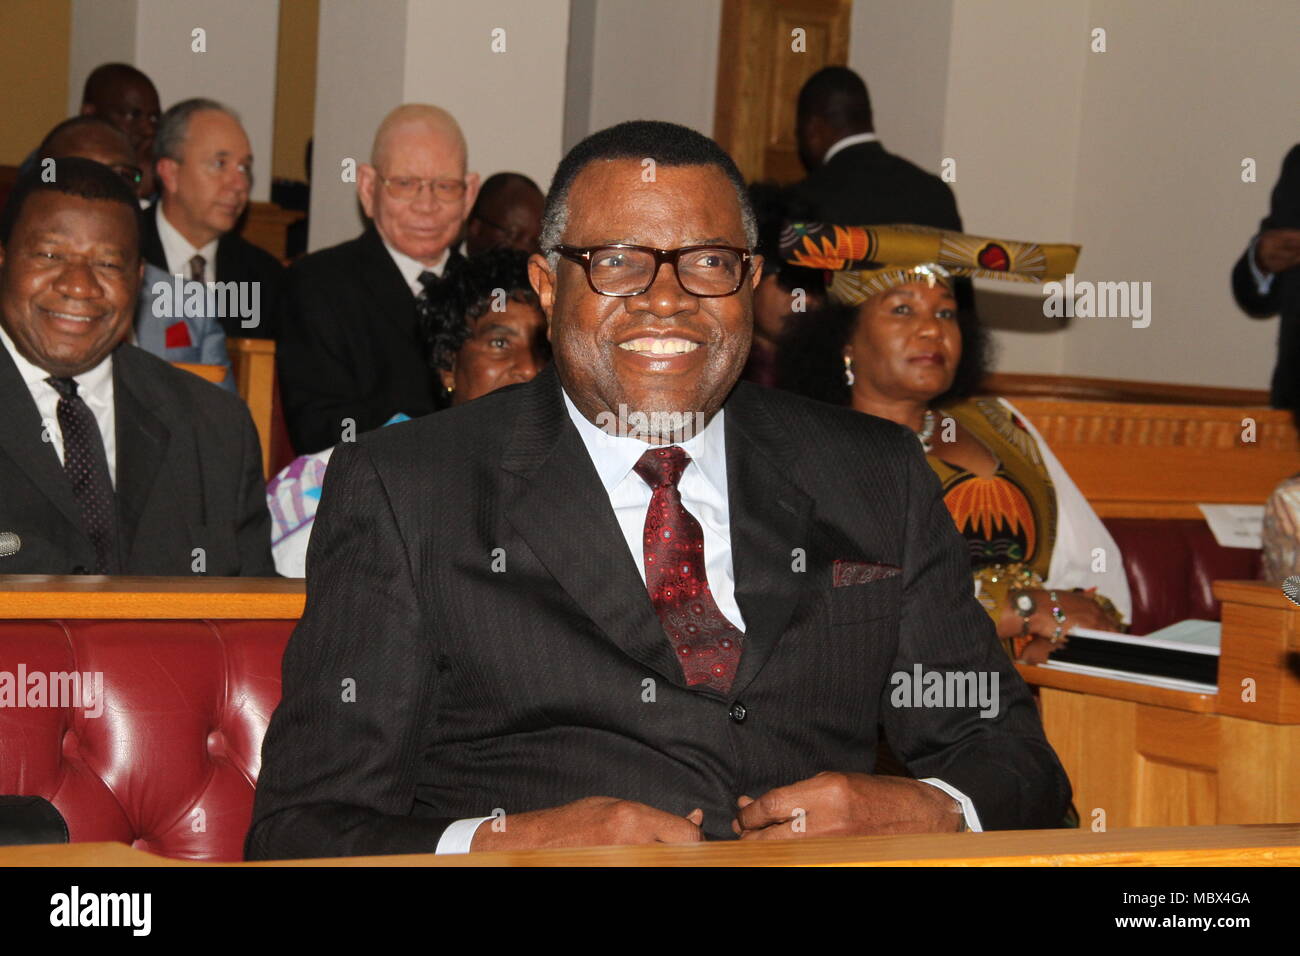 Windhoek. 11th Apr, 2018. Photo taken on April 11, 2018 shows Namibian President Hage Geingob in Parliament, Windhoek, capital of Namibia. Geingob delivered his fourth State of the Nation Address on Wednesday. Credit: Nampa/Xinhua/Alamy Live News Stock Photo